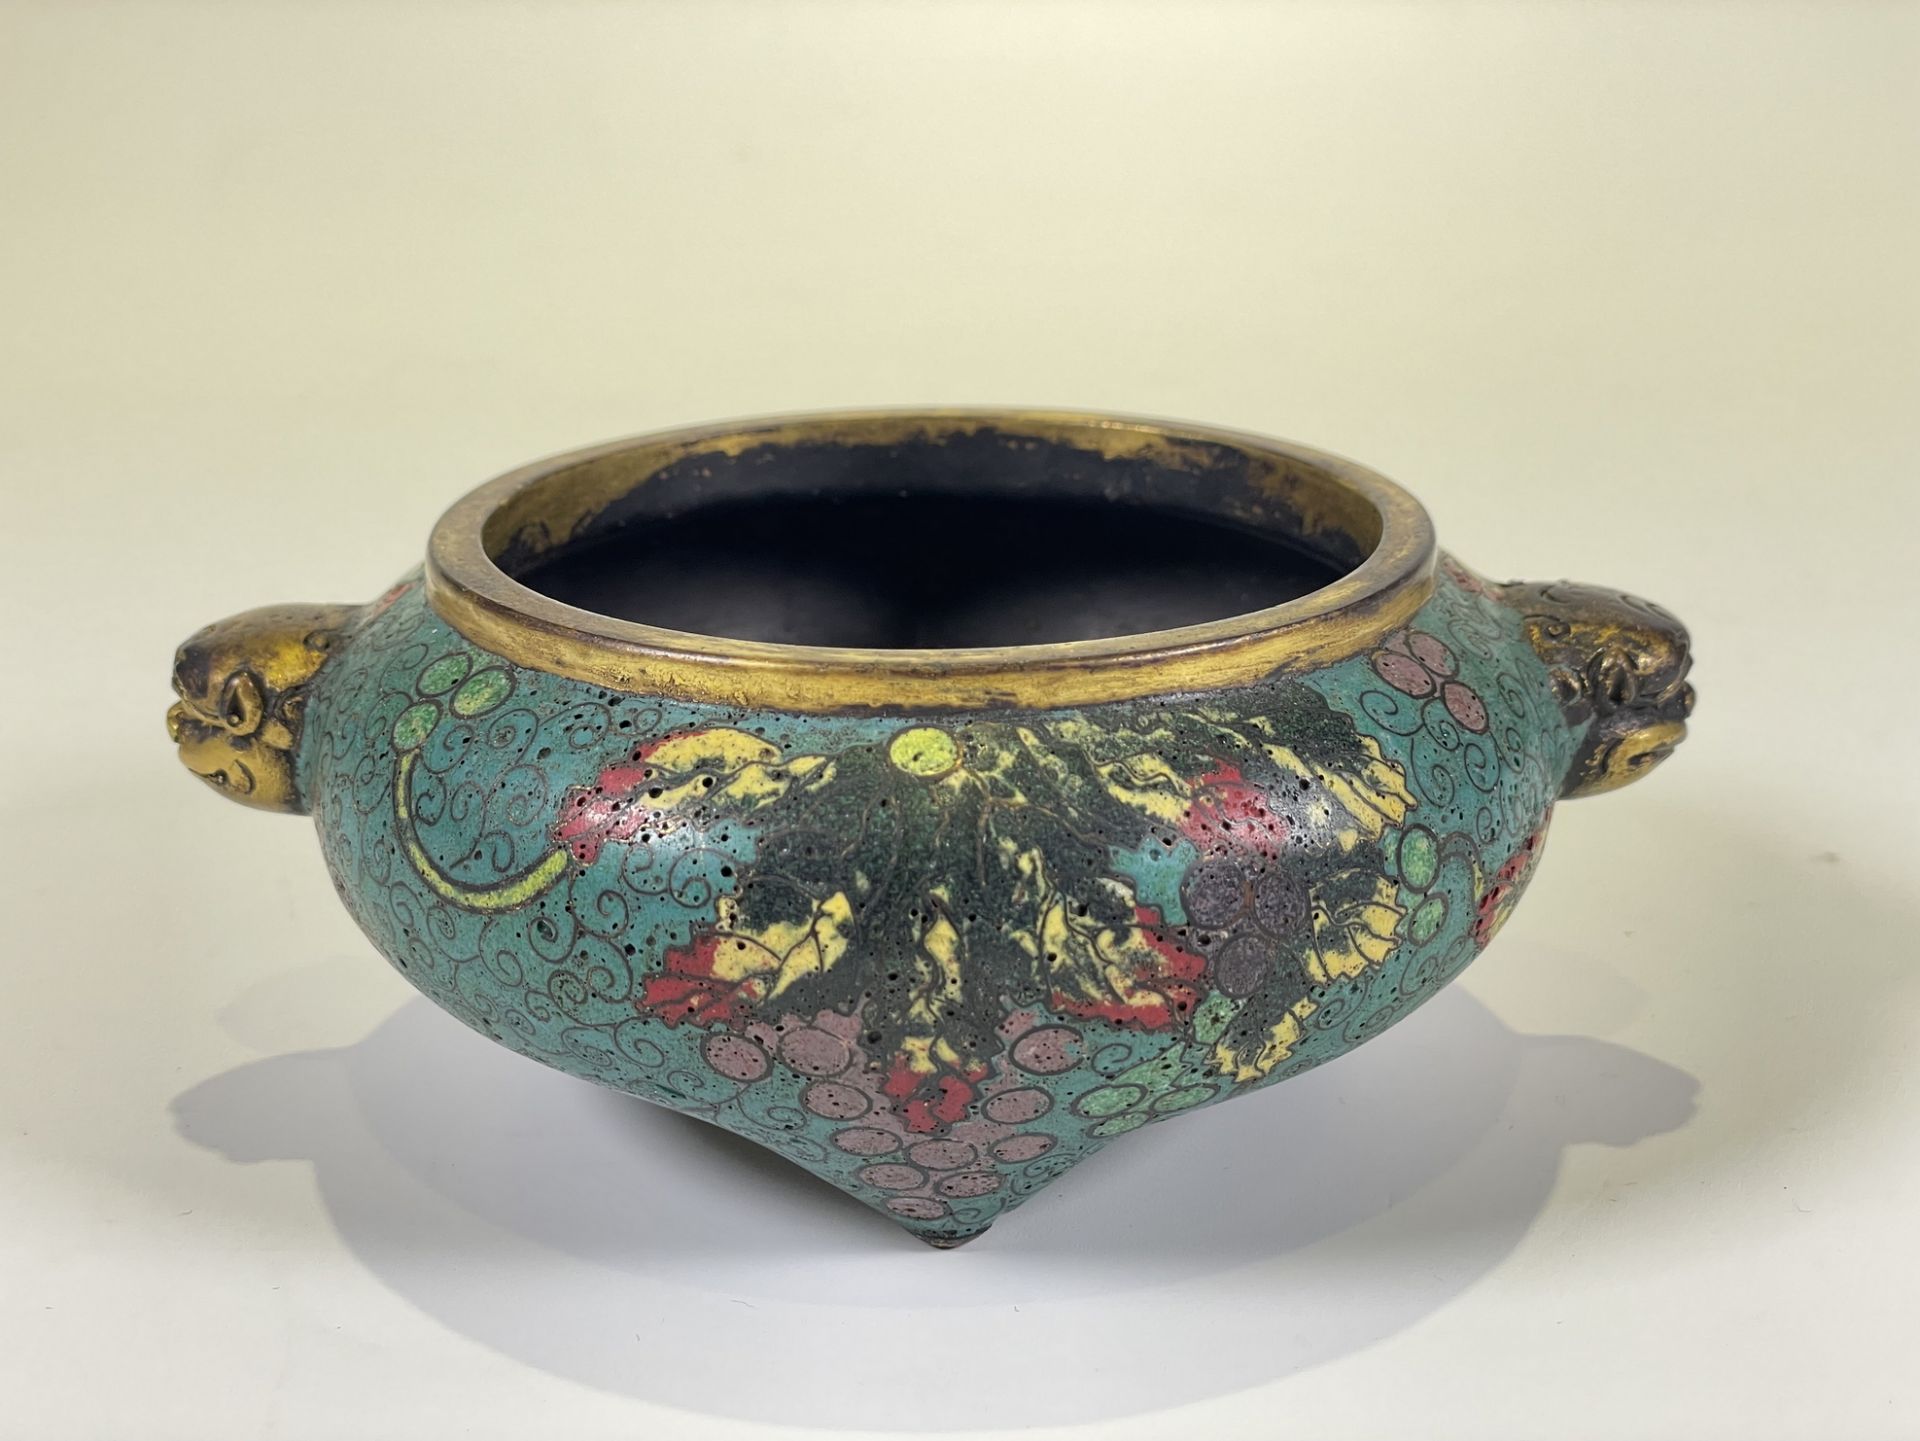 FINE CHINESE CLOISONNE, 17TH/18TH Century Pr.  Collection of NARA private gallary. 